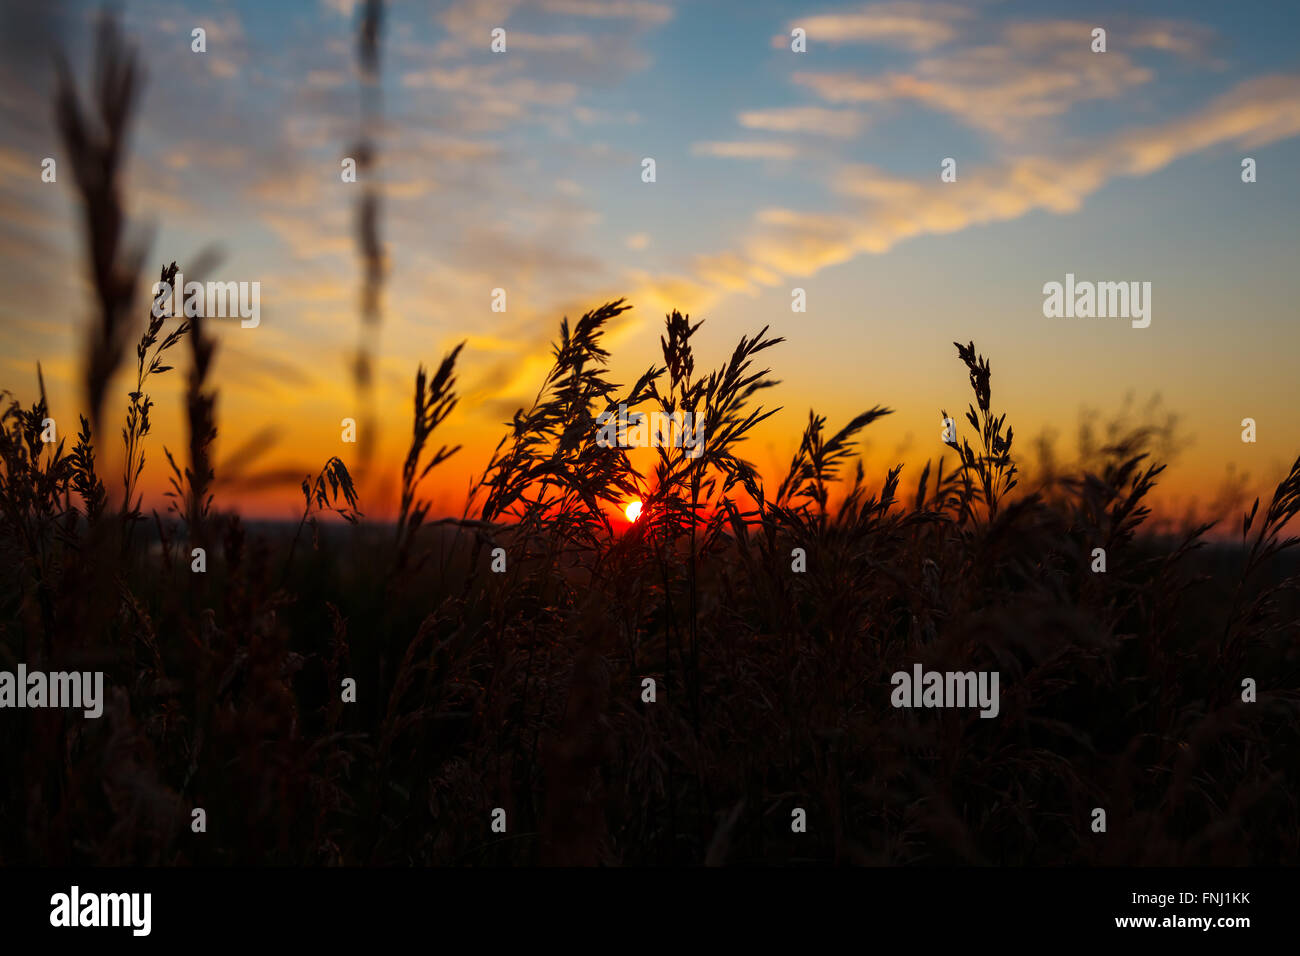 Dry spare of grass in sunset dawn. Soft focus Stock Photo